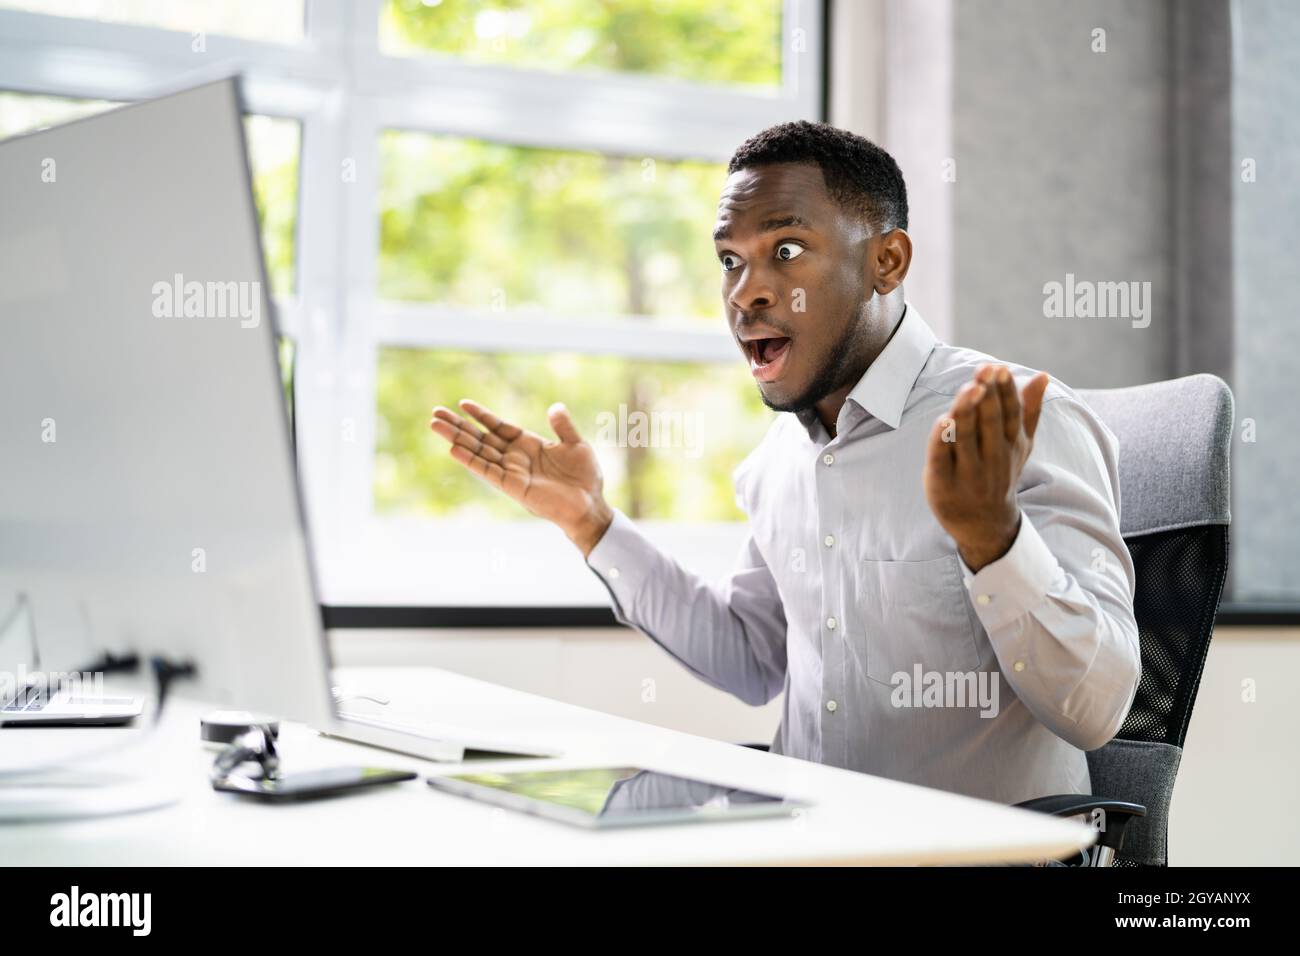 Shocked African Man With Ransomware On Office Computer Stock Photo